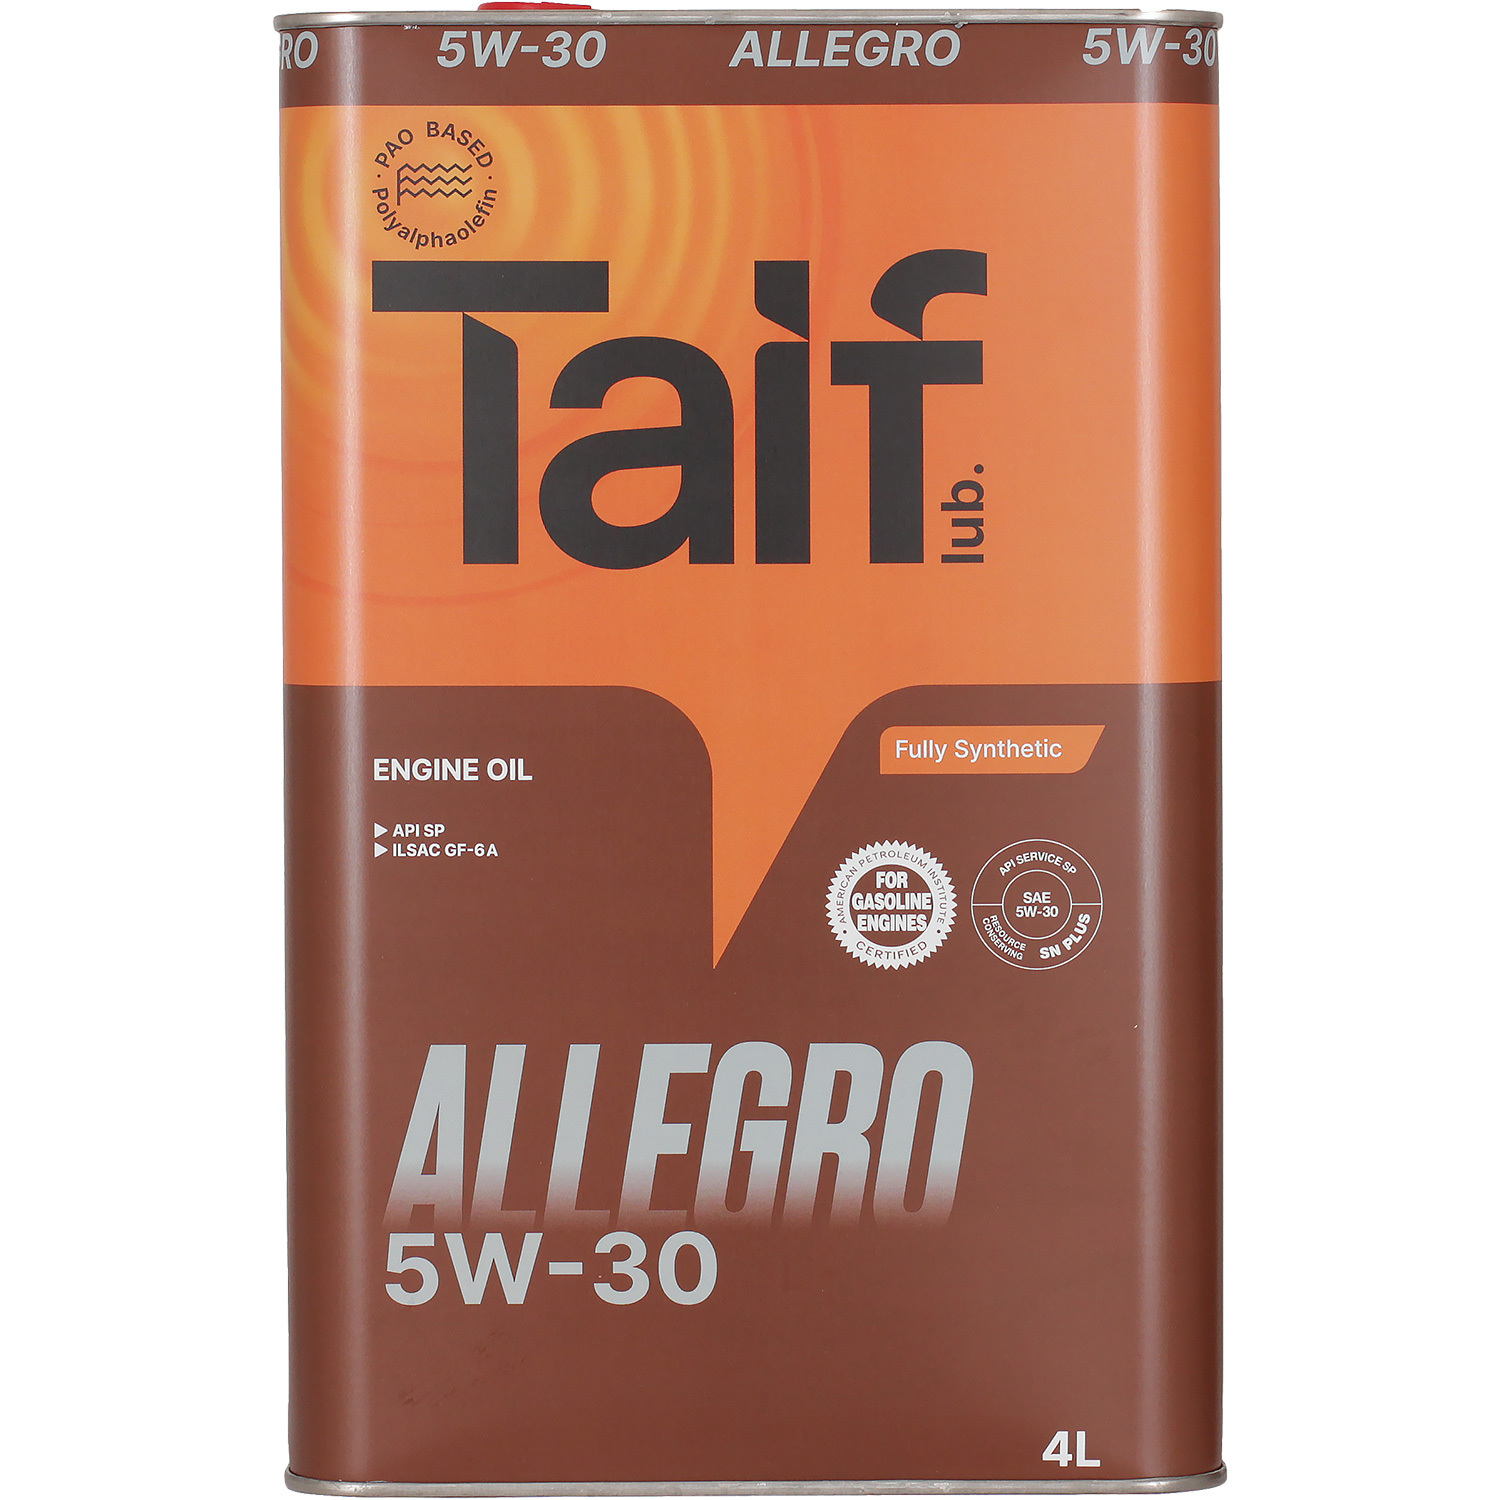 Taif Моторное масло Taif ALLEGRO 5W-30, 4 л масло моторное taif allegro 5w 30 4л